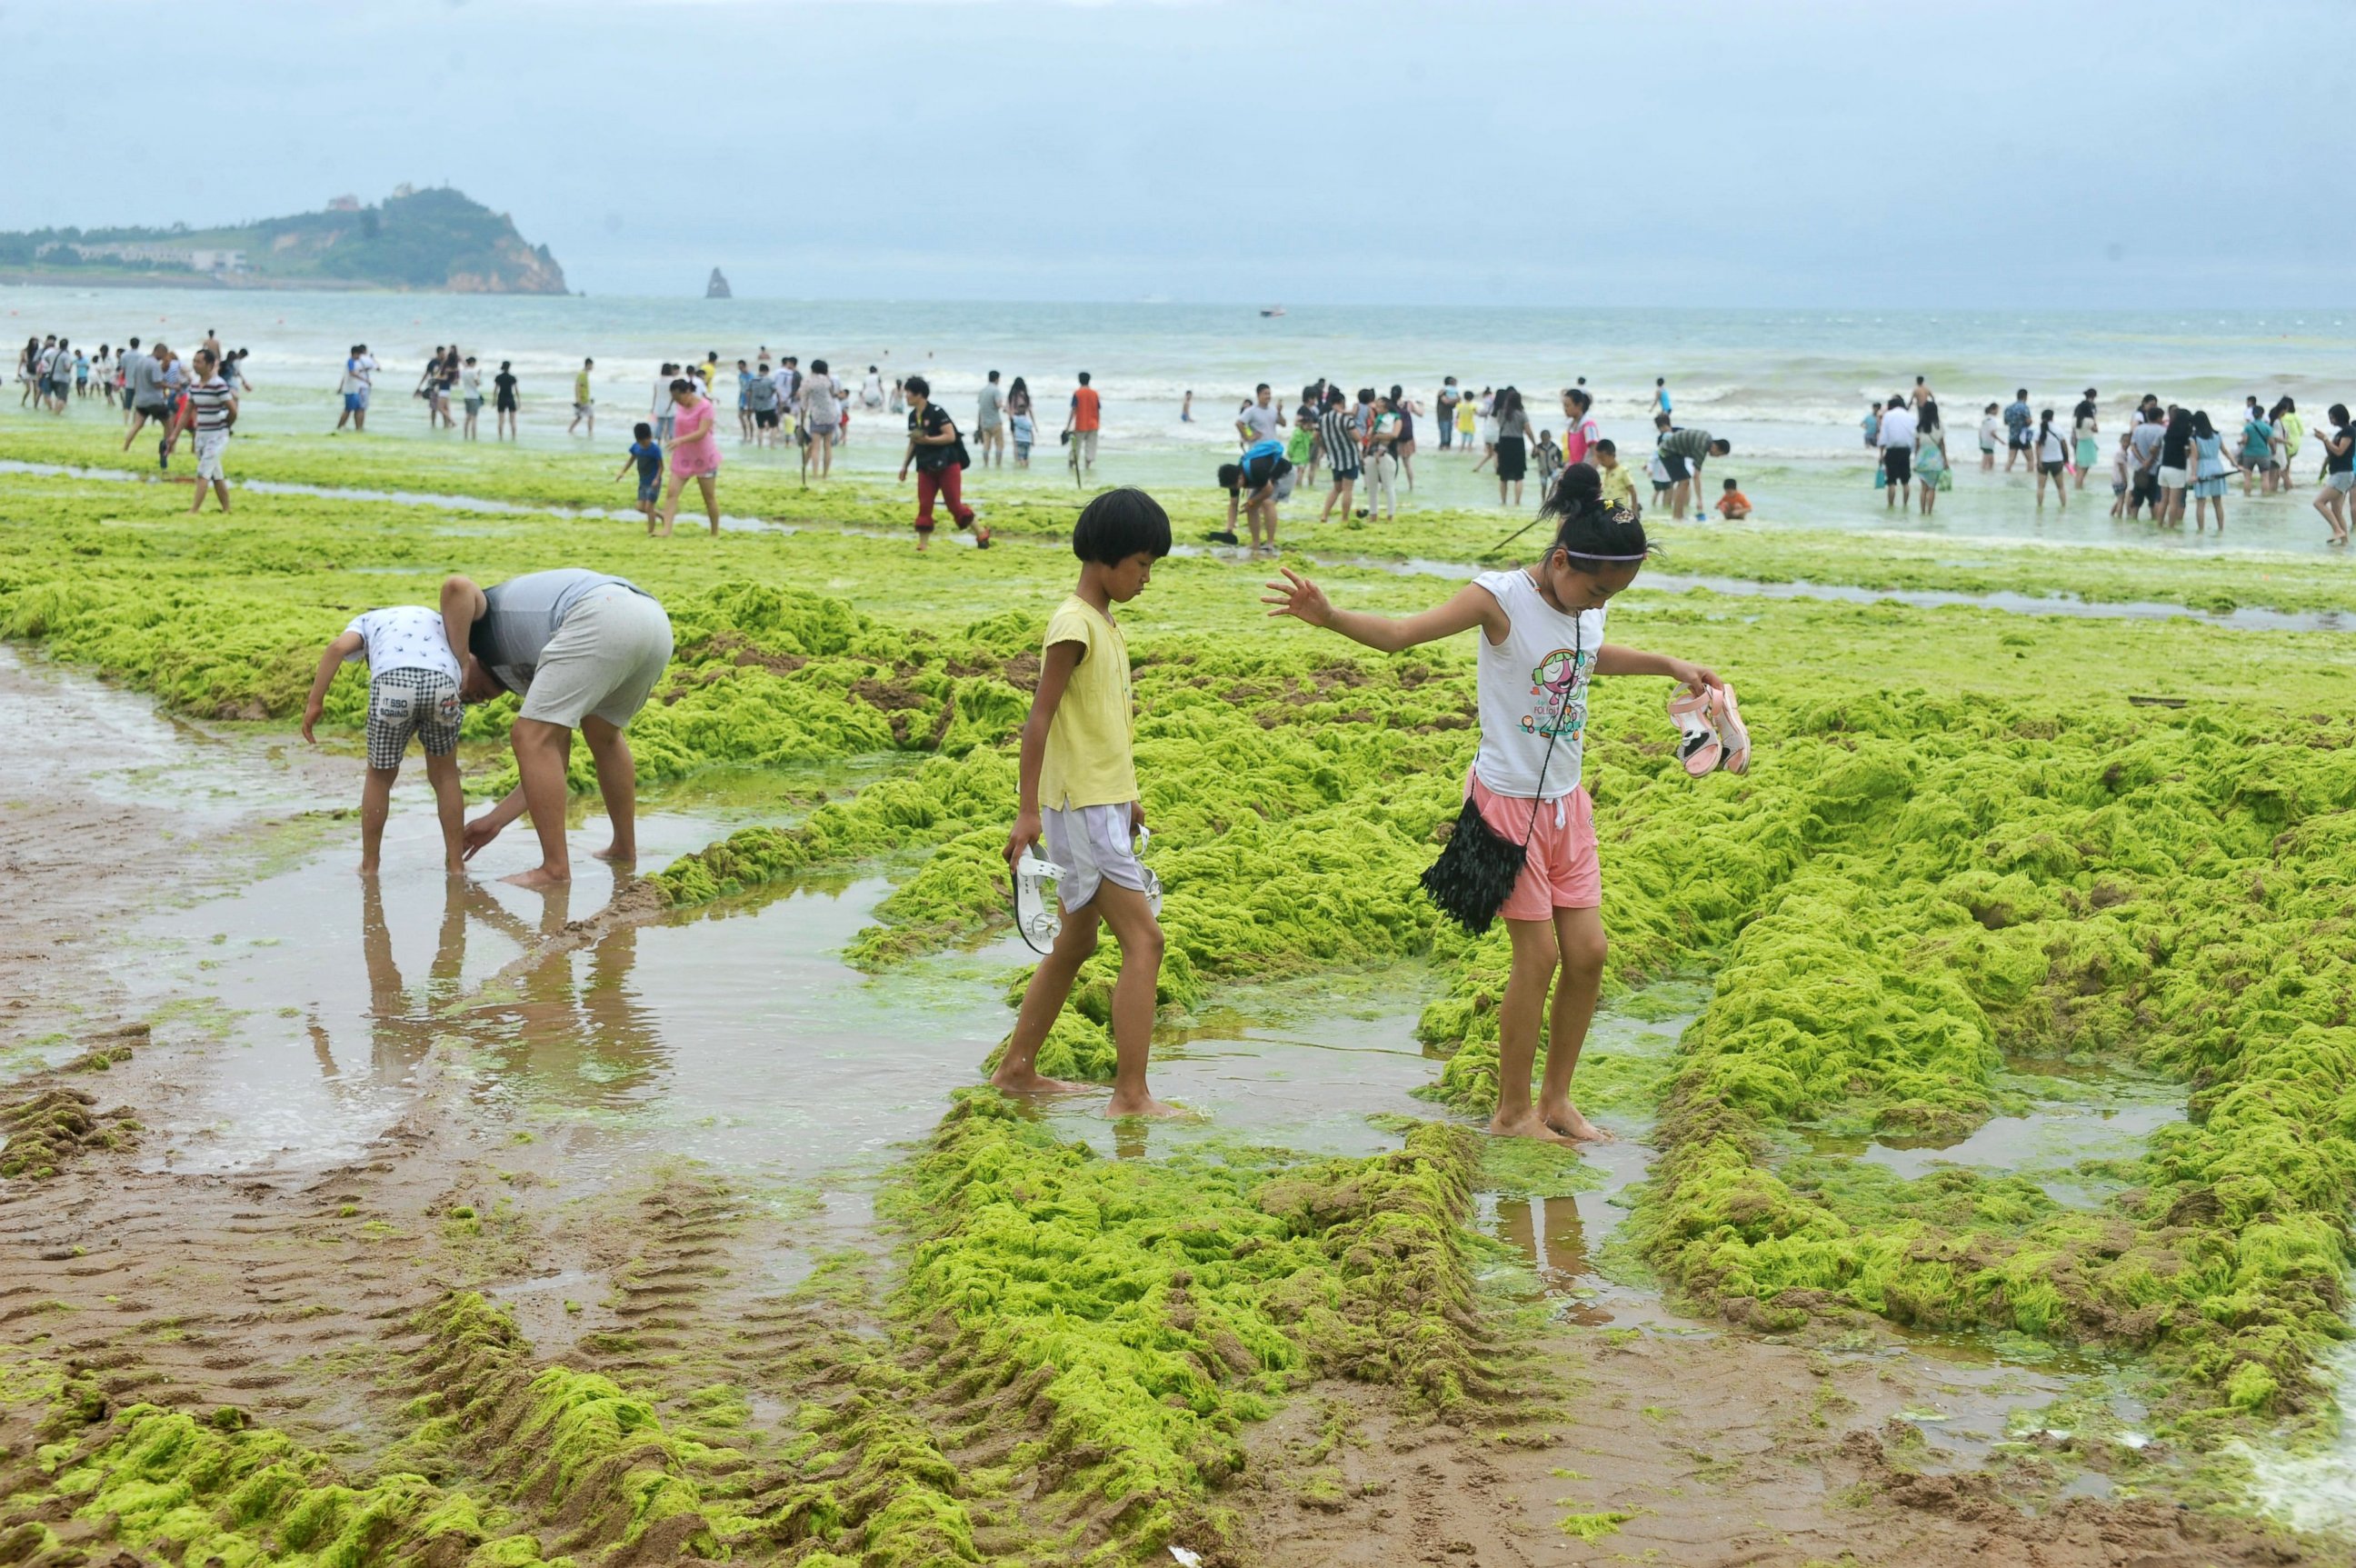 PHOTO: Tourists play at a beach covered by a thick layer of green algae on July 20, 2015 in Qingdao, China. 